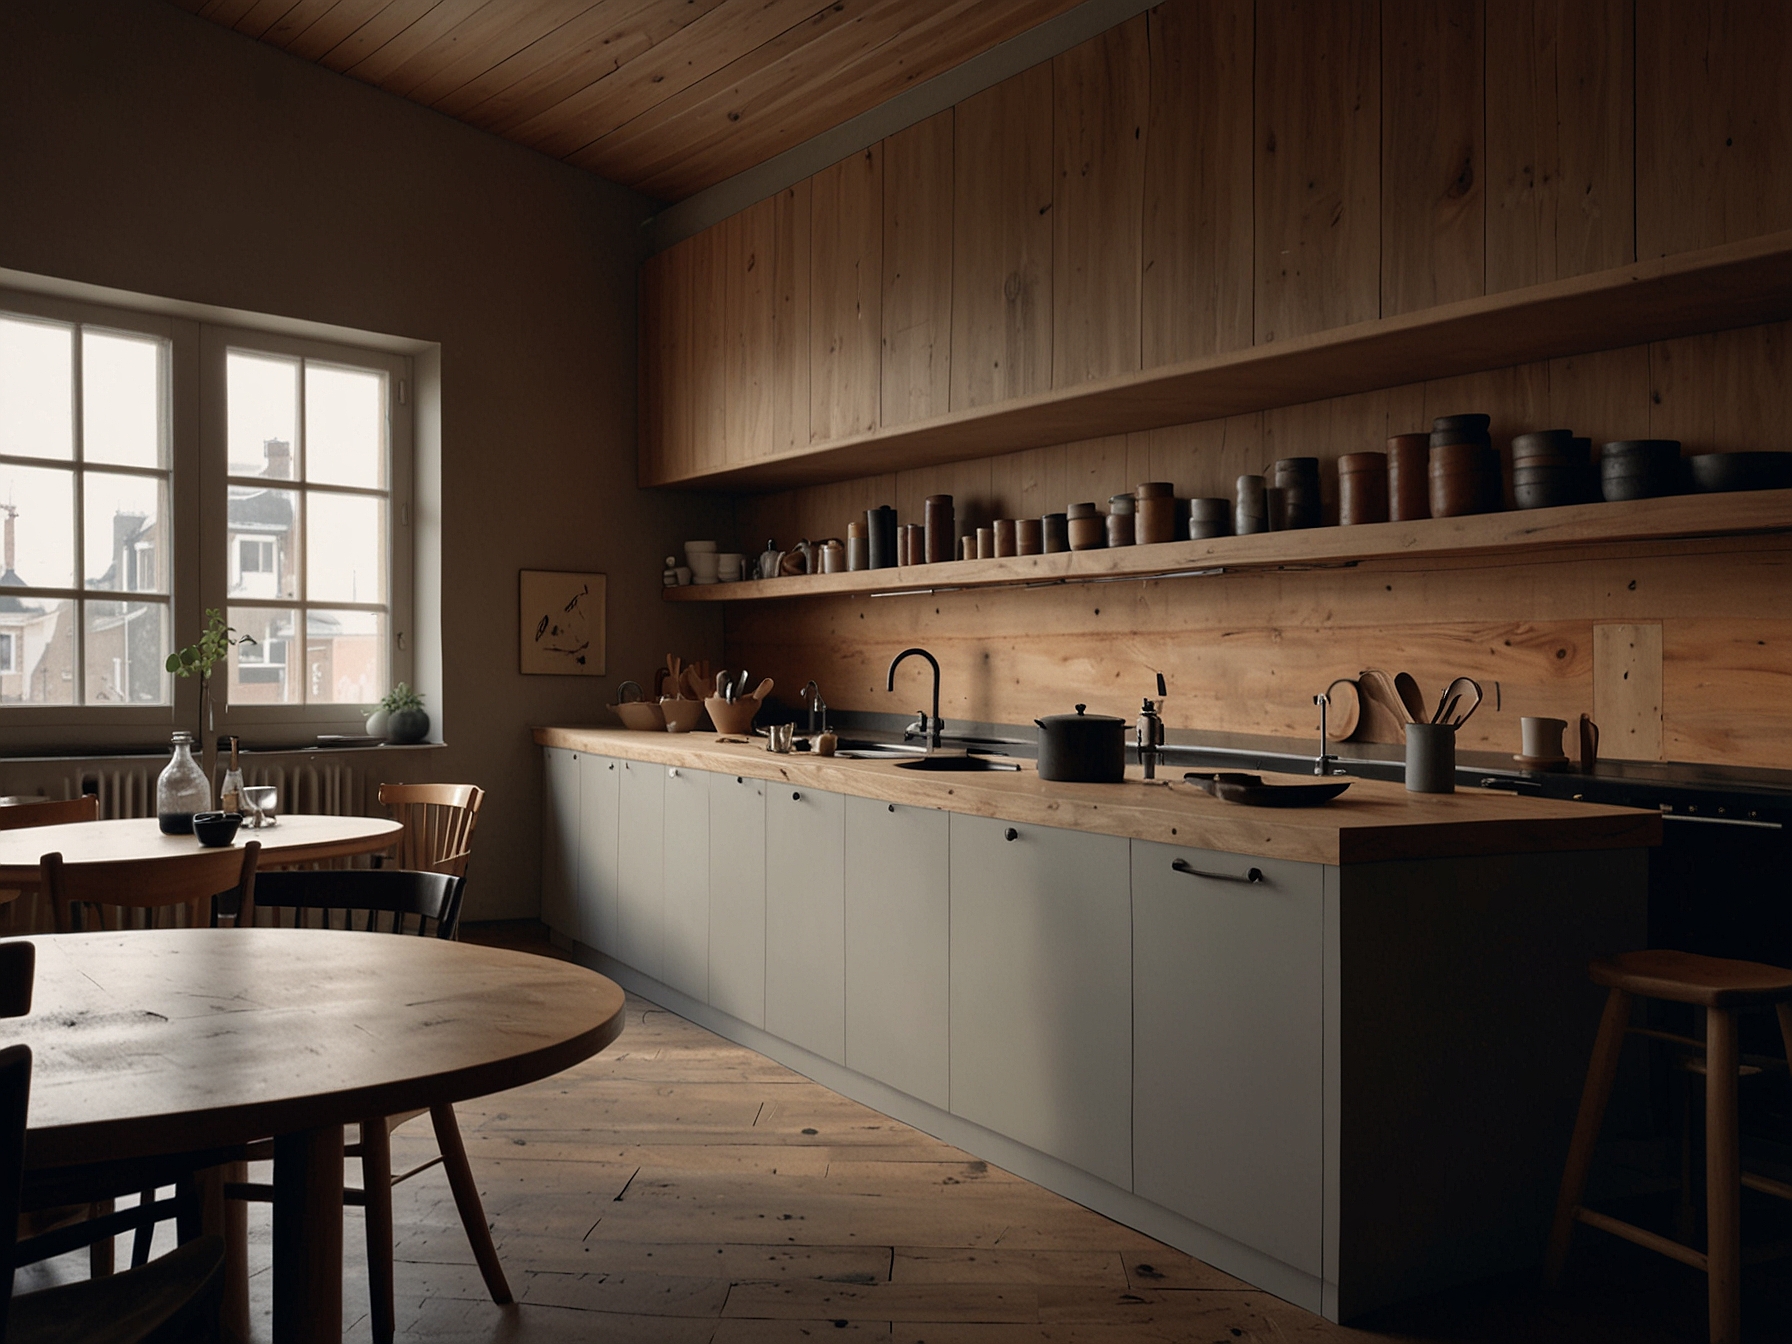 An inviting look inside Noma's kitchen in Copenhagen, where Scandinavian design principles of simplicity, functionality, and beauty are evident in every meticulously crafted detail.